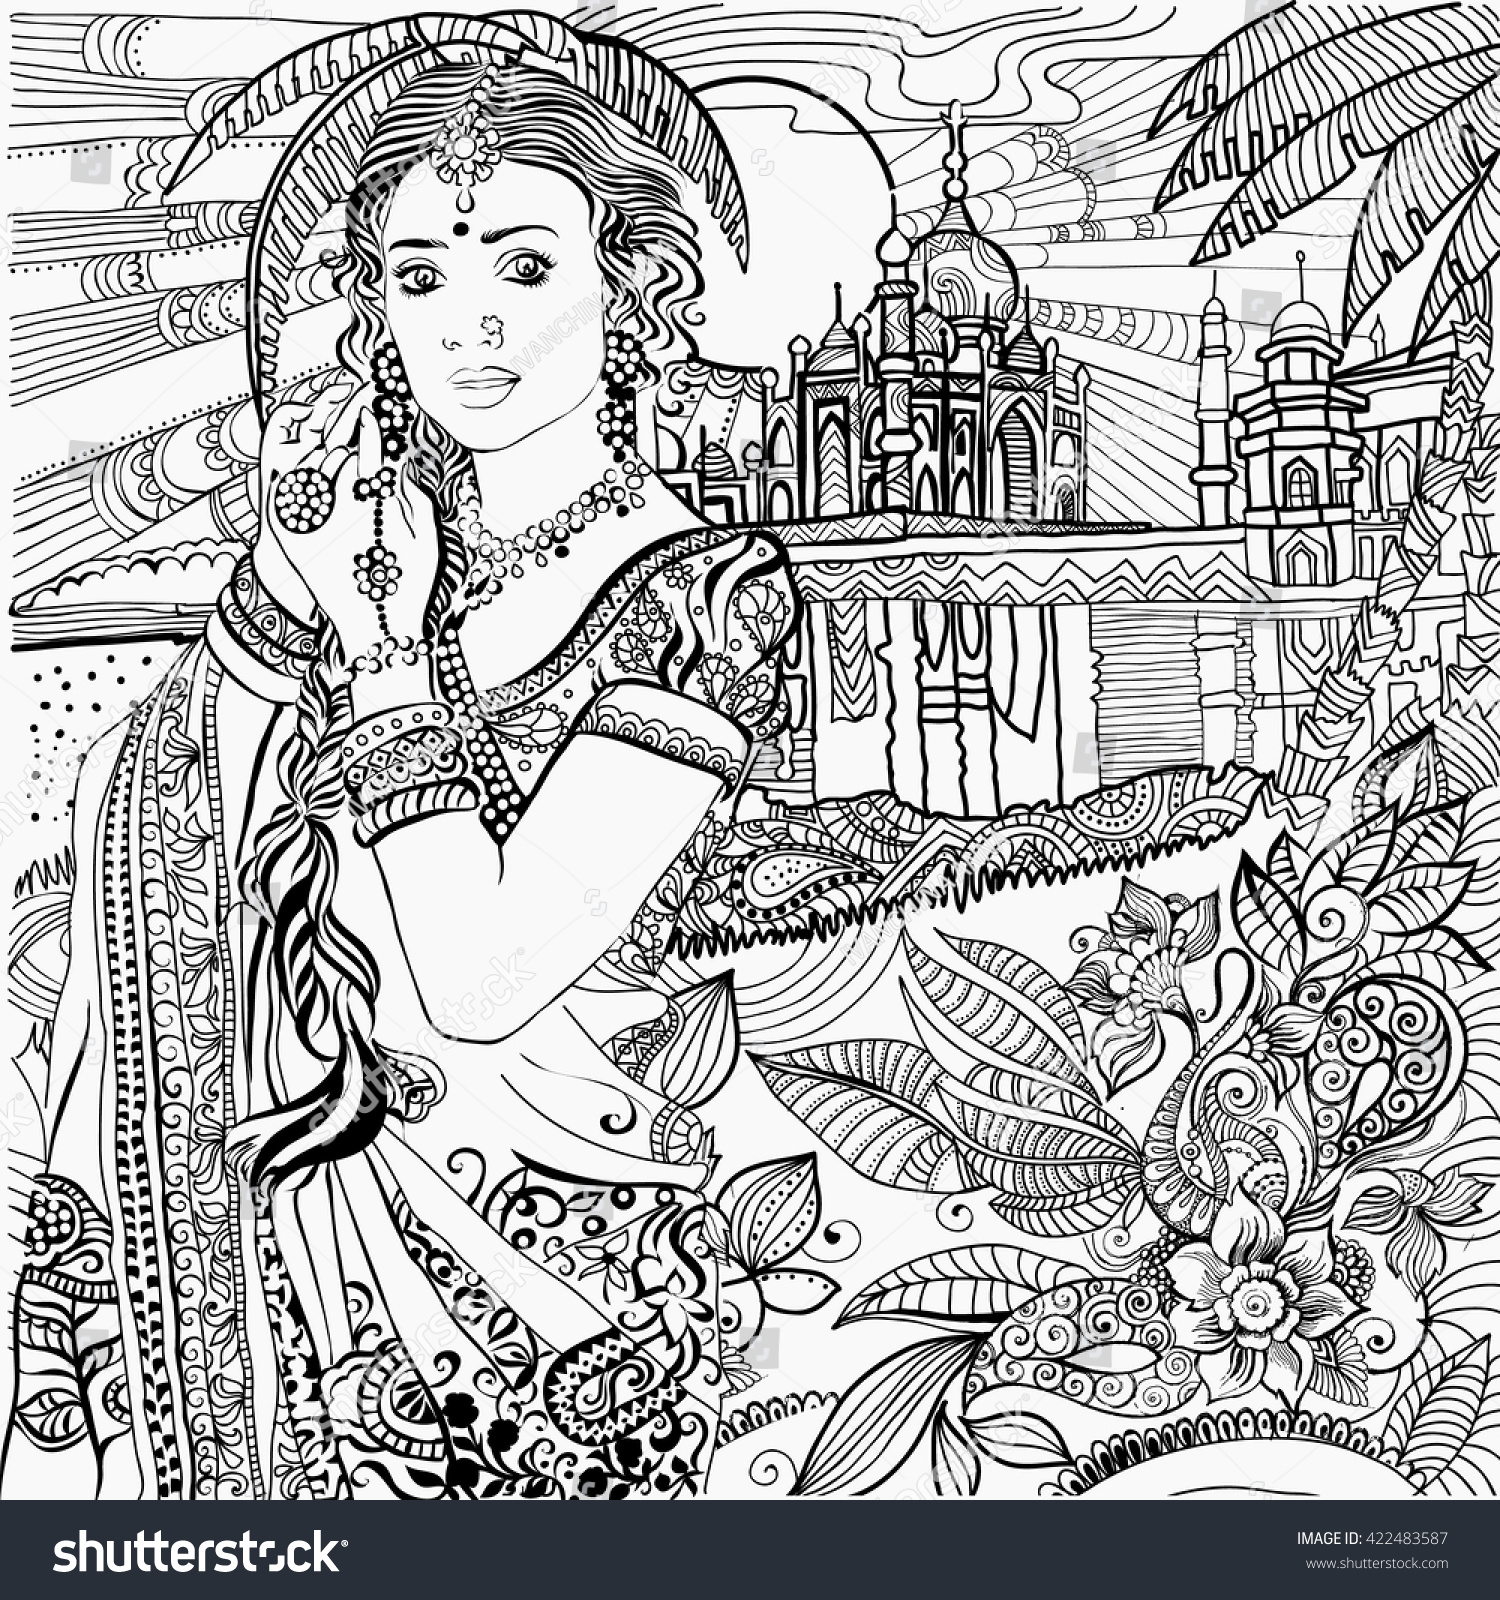 18+ Indian Coloring Page Pictures